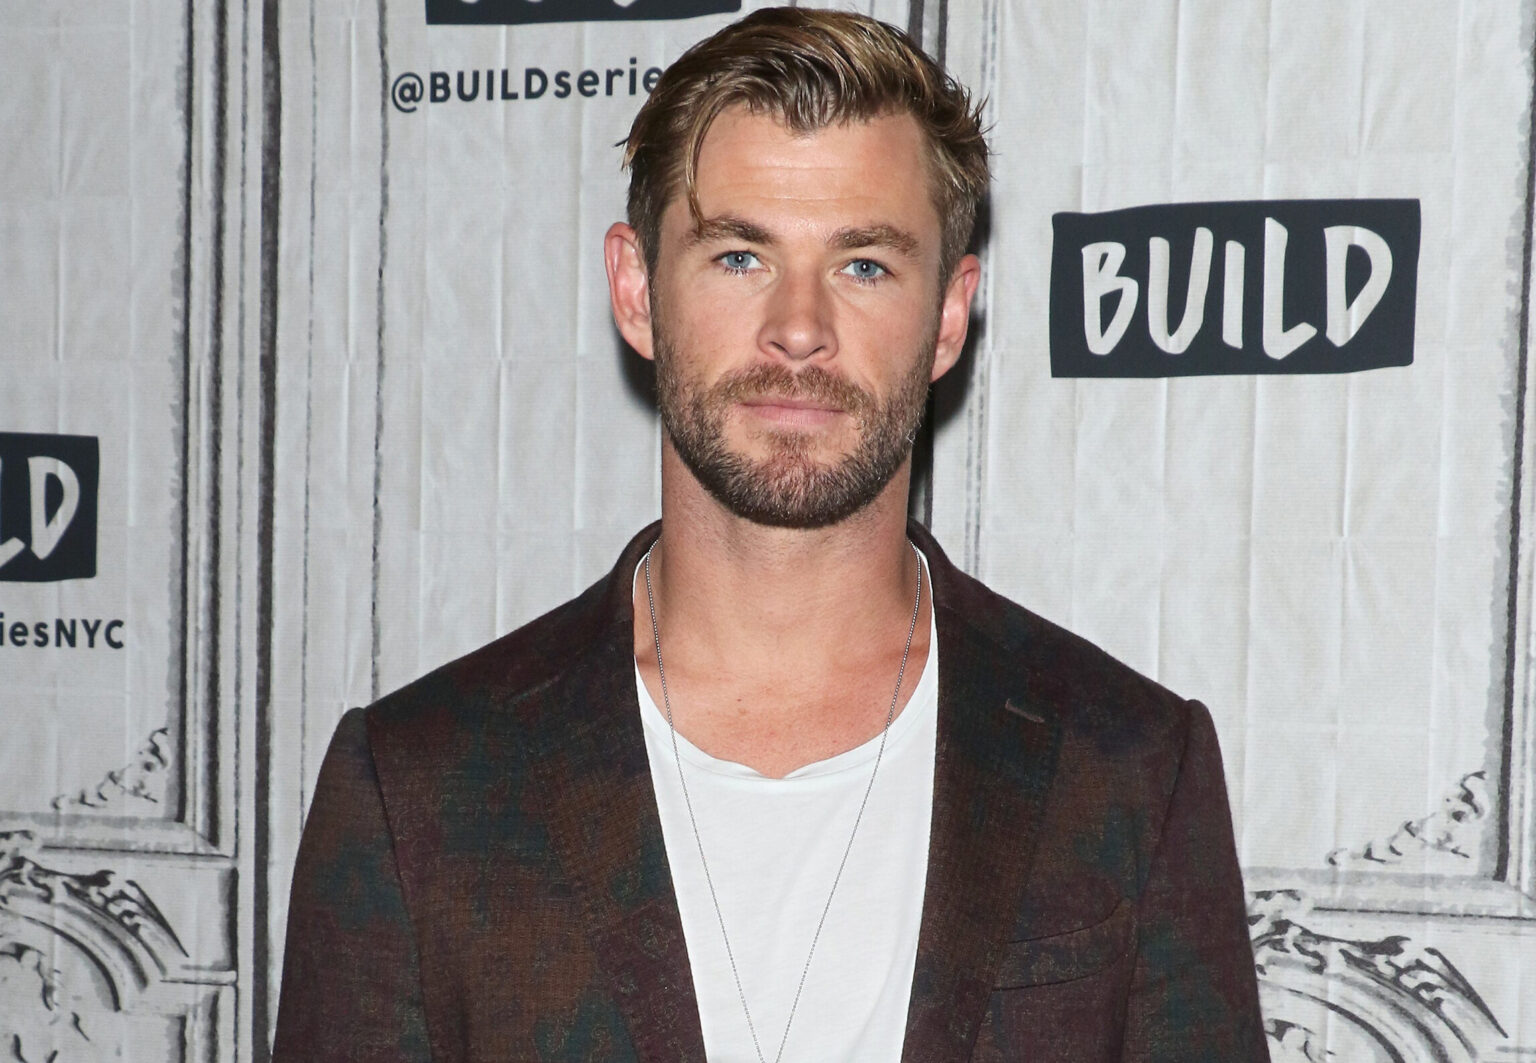 Chris Hemsworth has taken over Instagram with his giant muscles and rock-hard abs. Here are some hot workout pictures of him – for research.